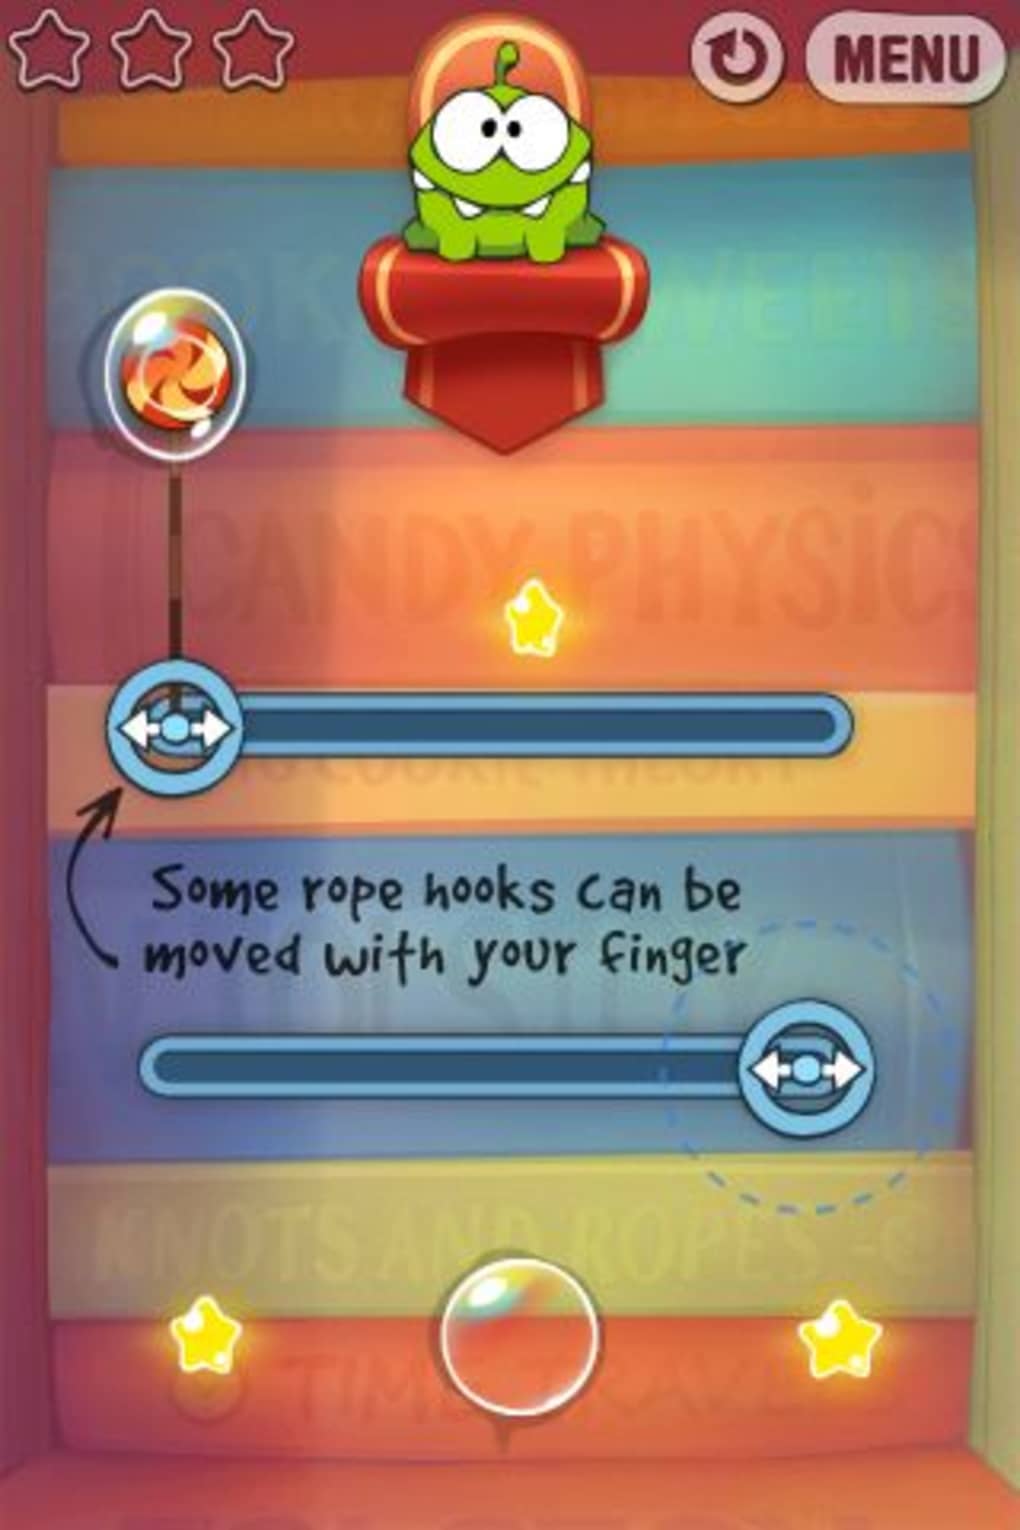 iPhone + iPad Gems: Cut the Rope Experiments, Shoot the Birds